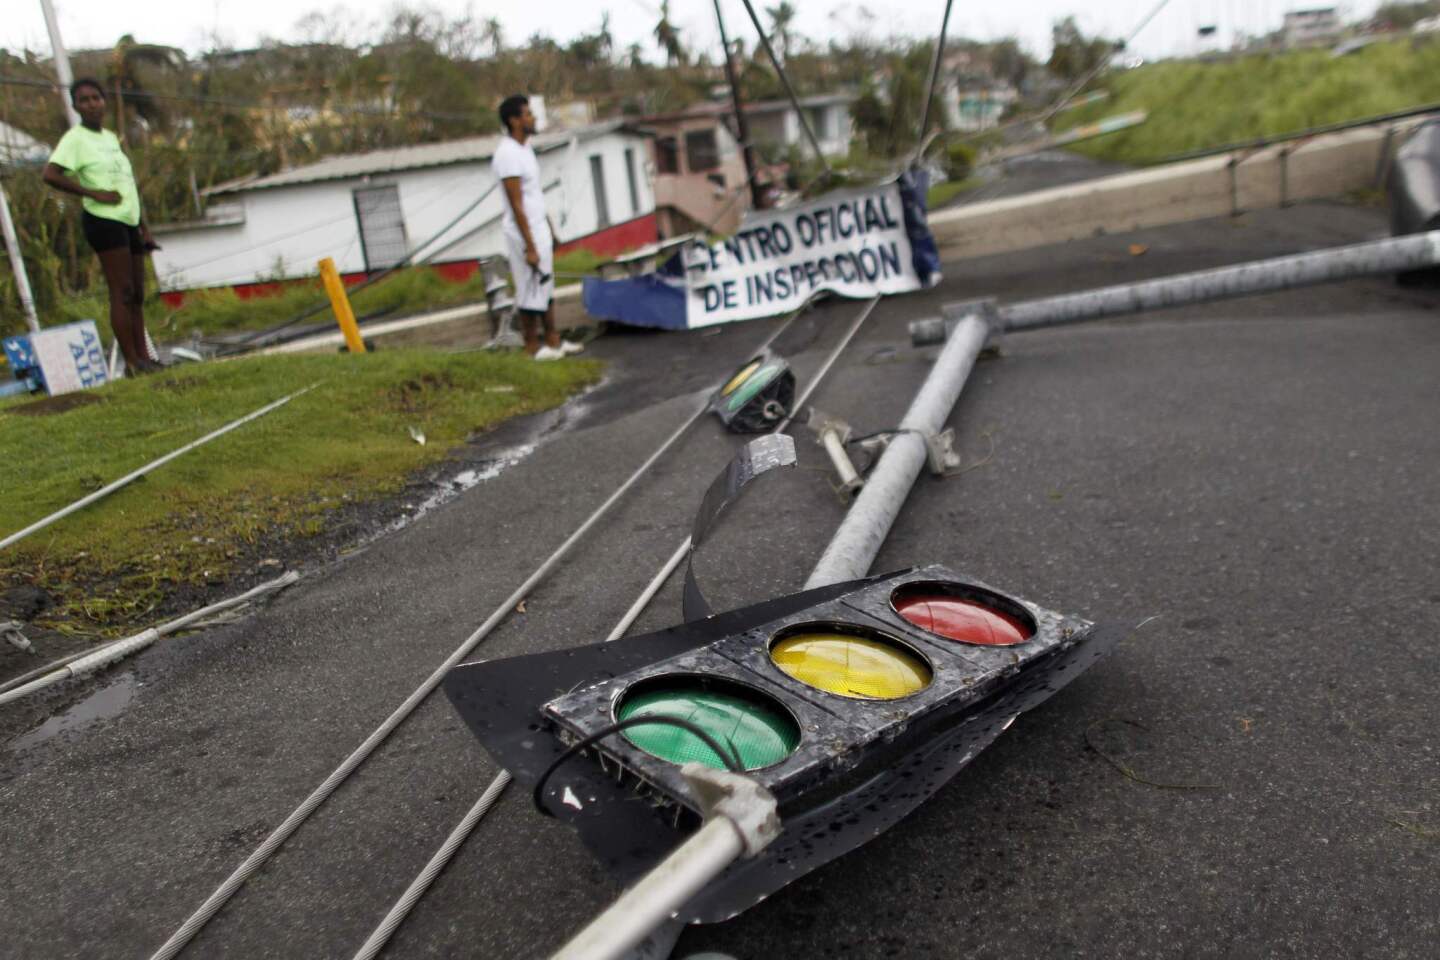 Downed traffic lights and power lines are seen in the aftermath of Hurricane Maria in Luquillo, Puerto Rico.